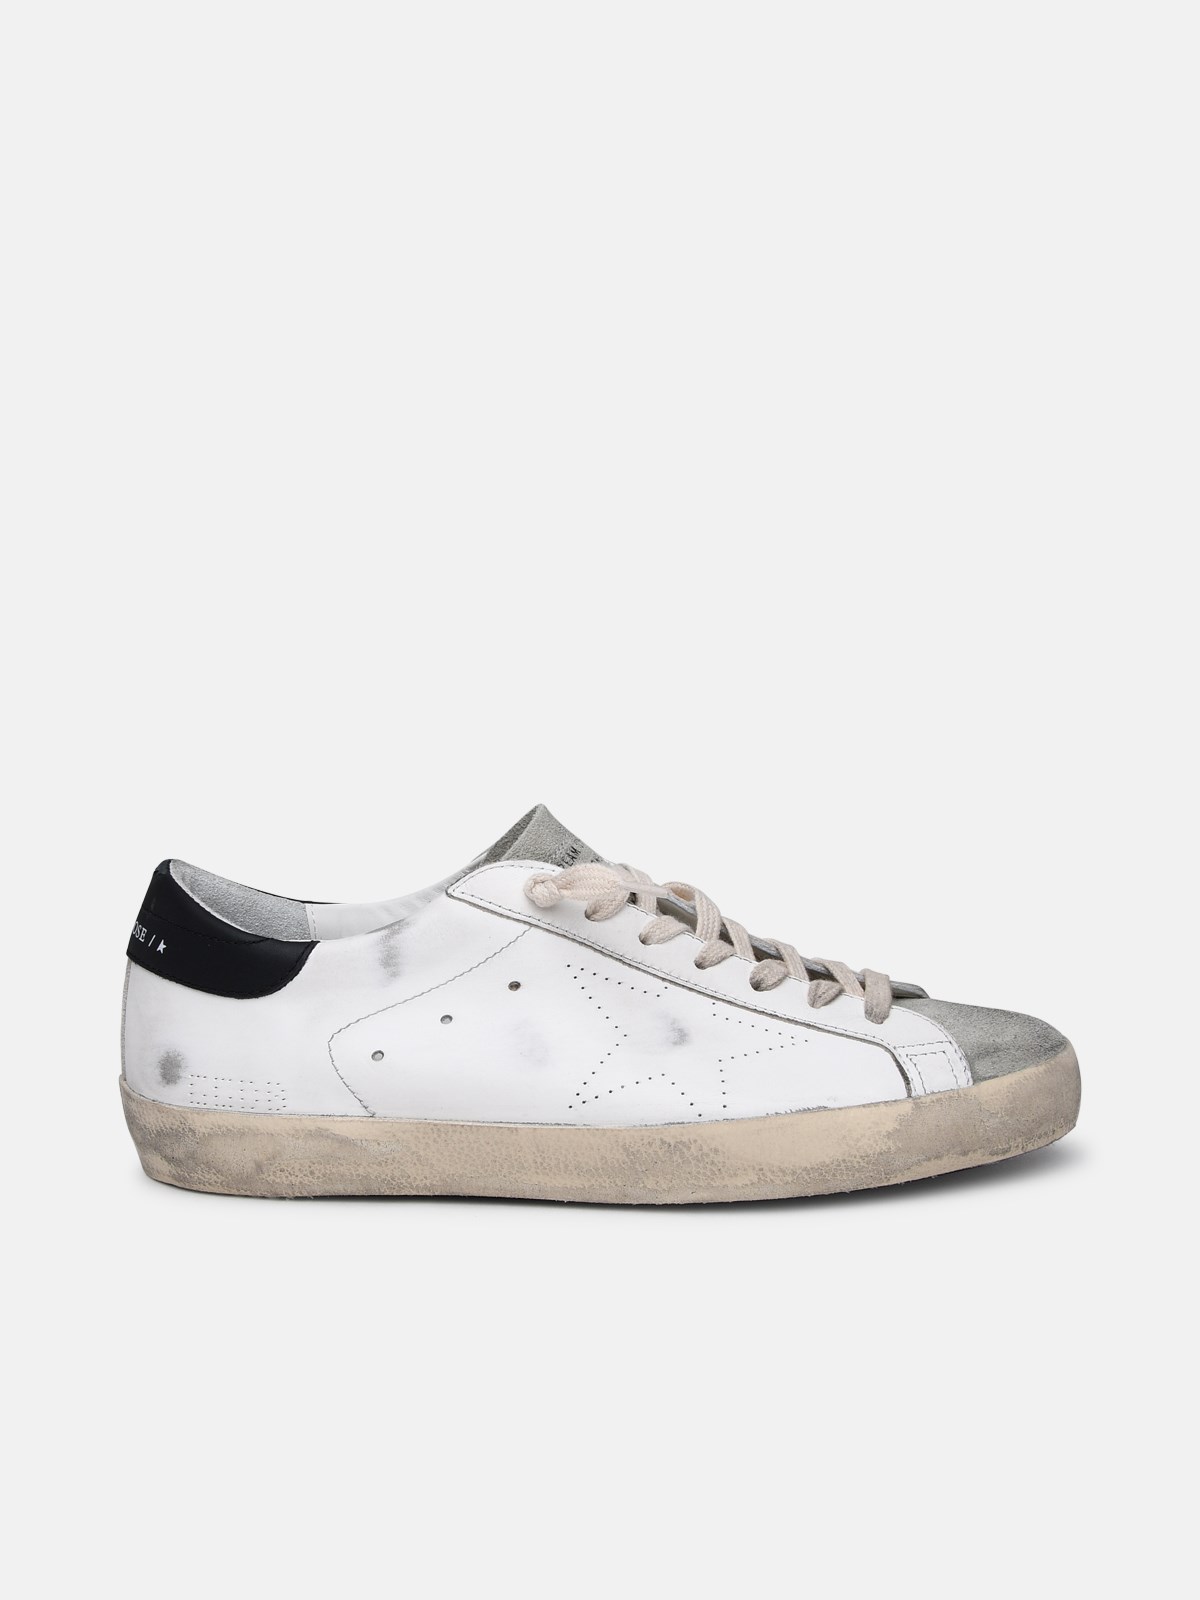 Golden Goose White Leather Super-star Sneakers